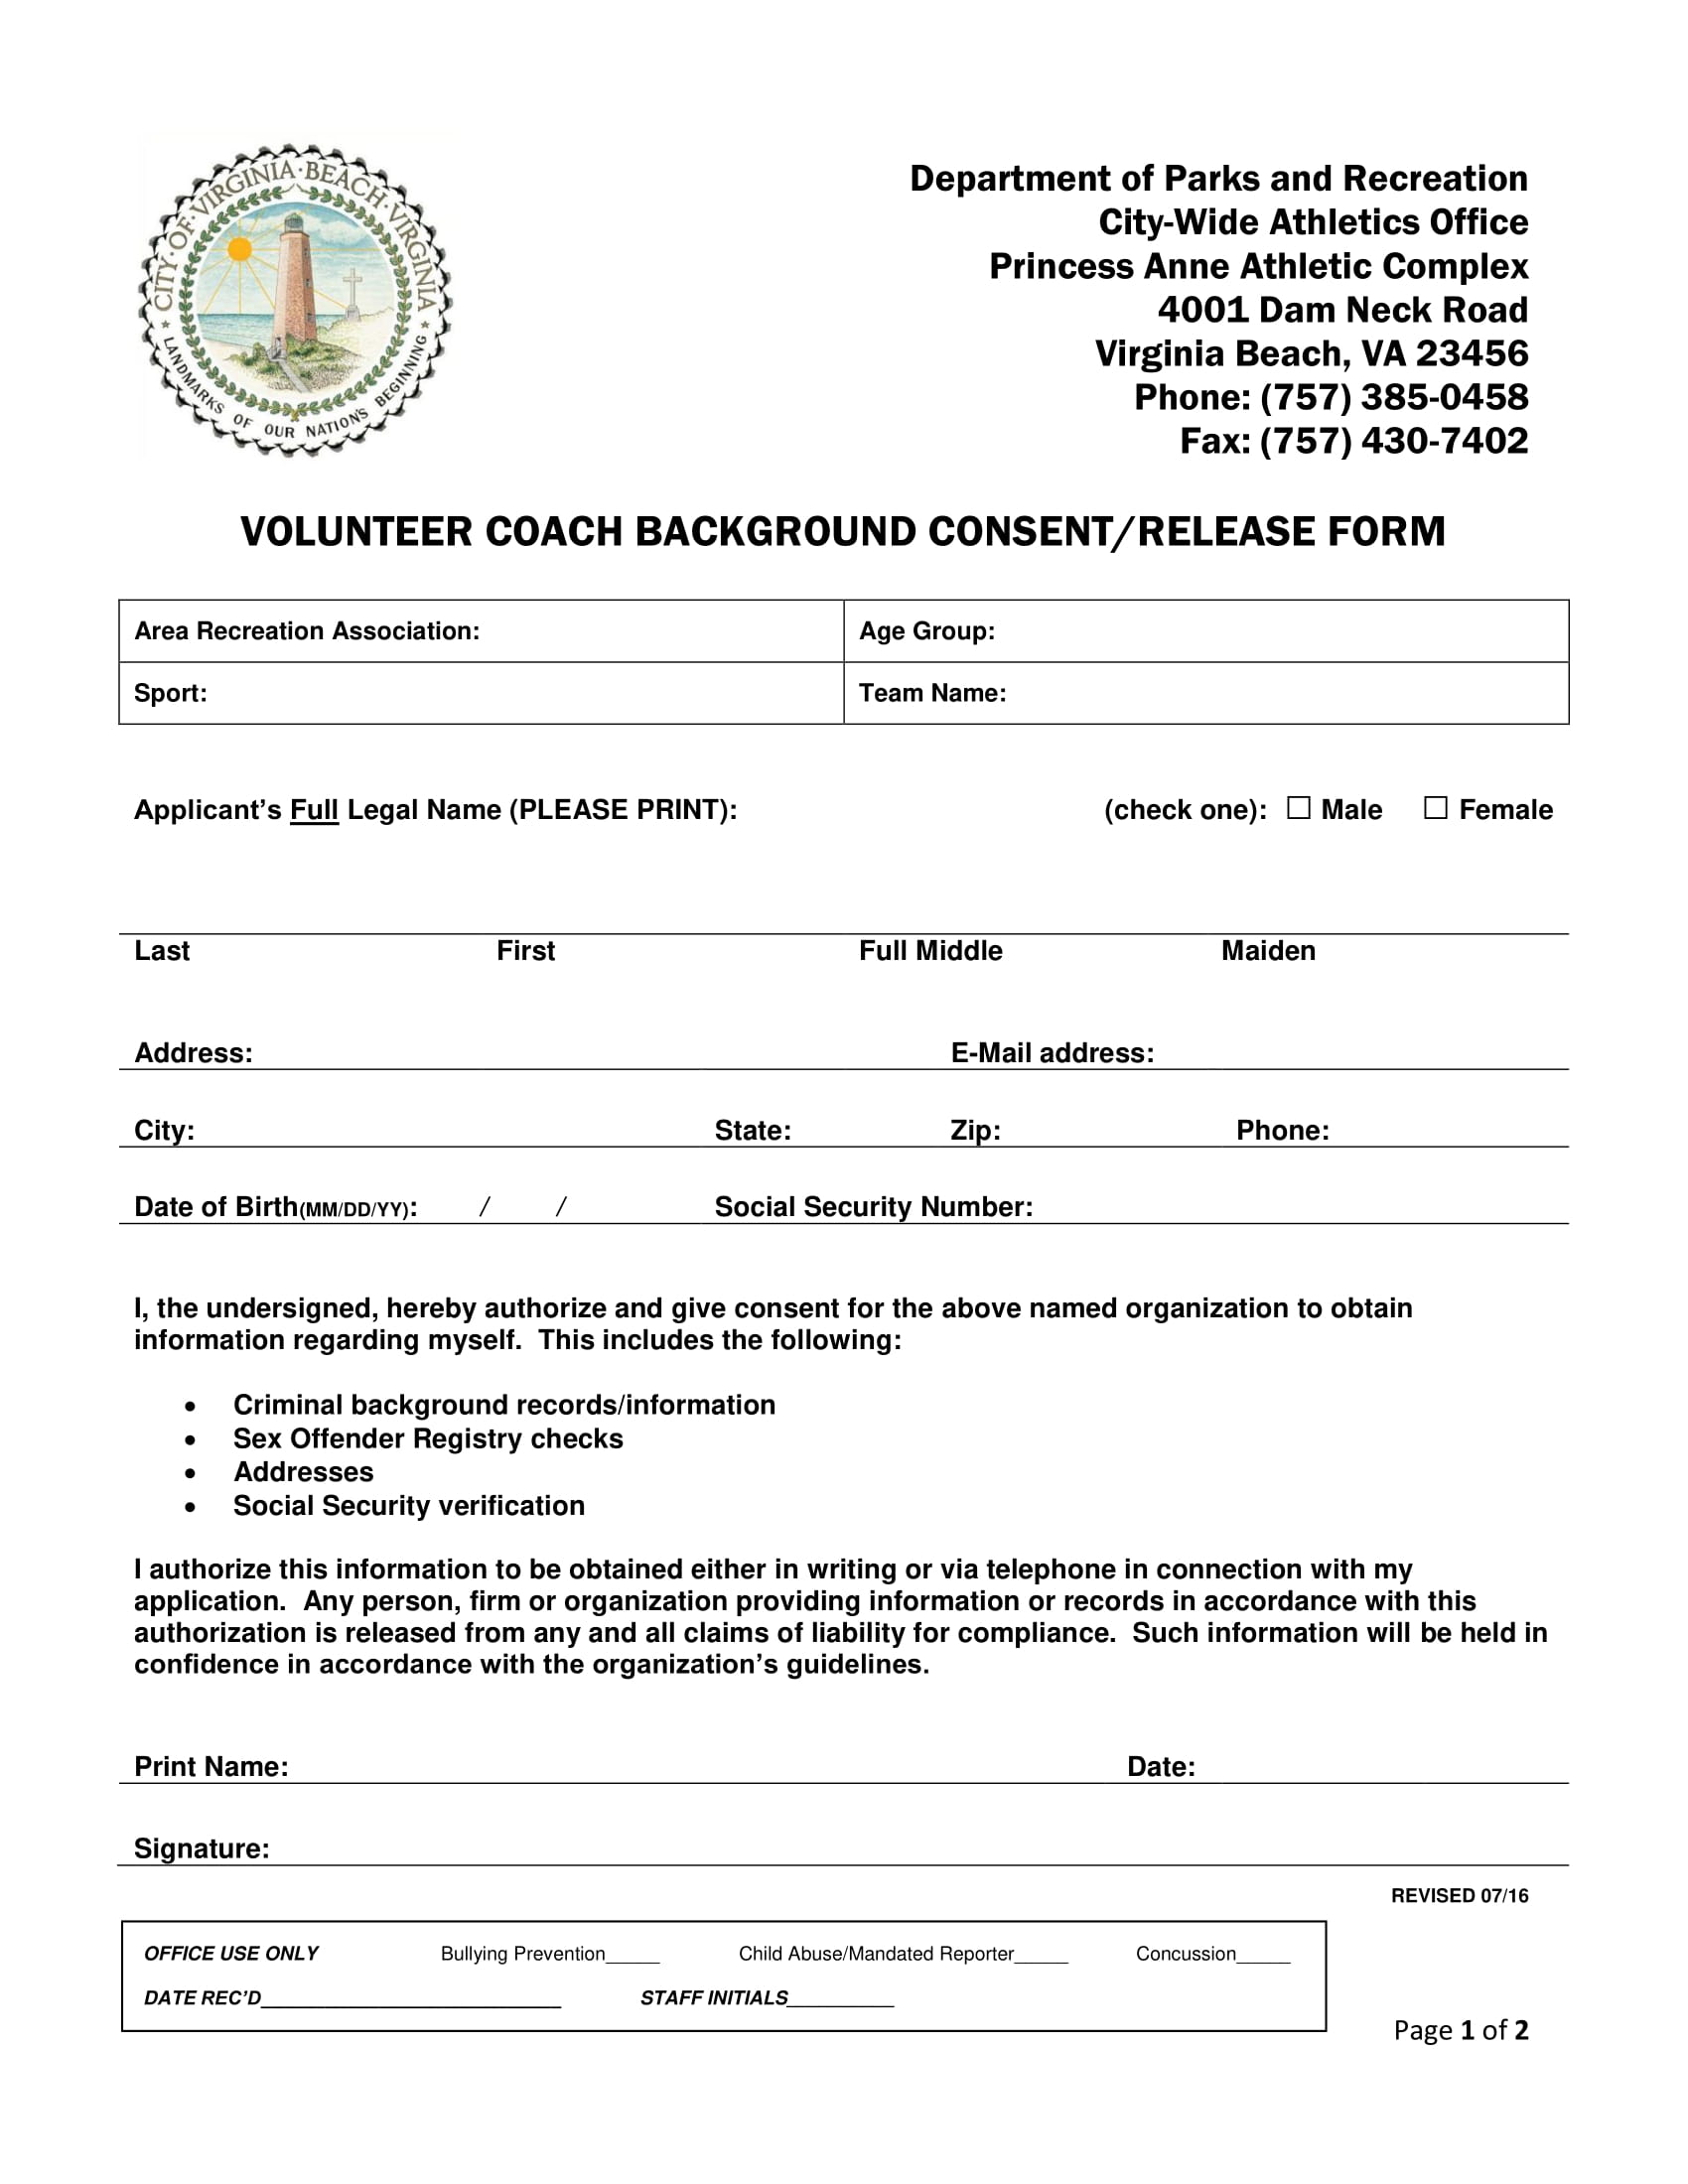 volunteer coach background consent release form